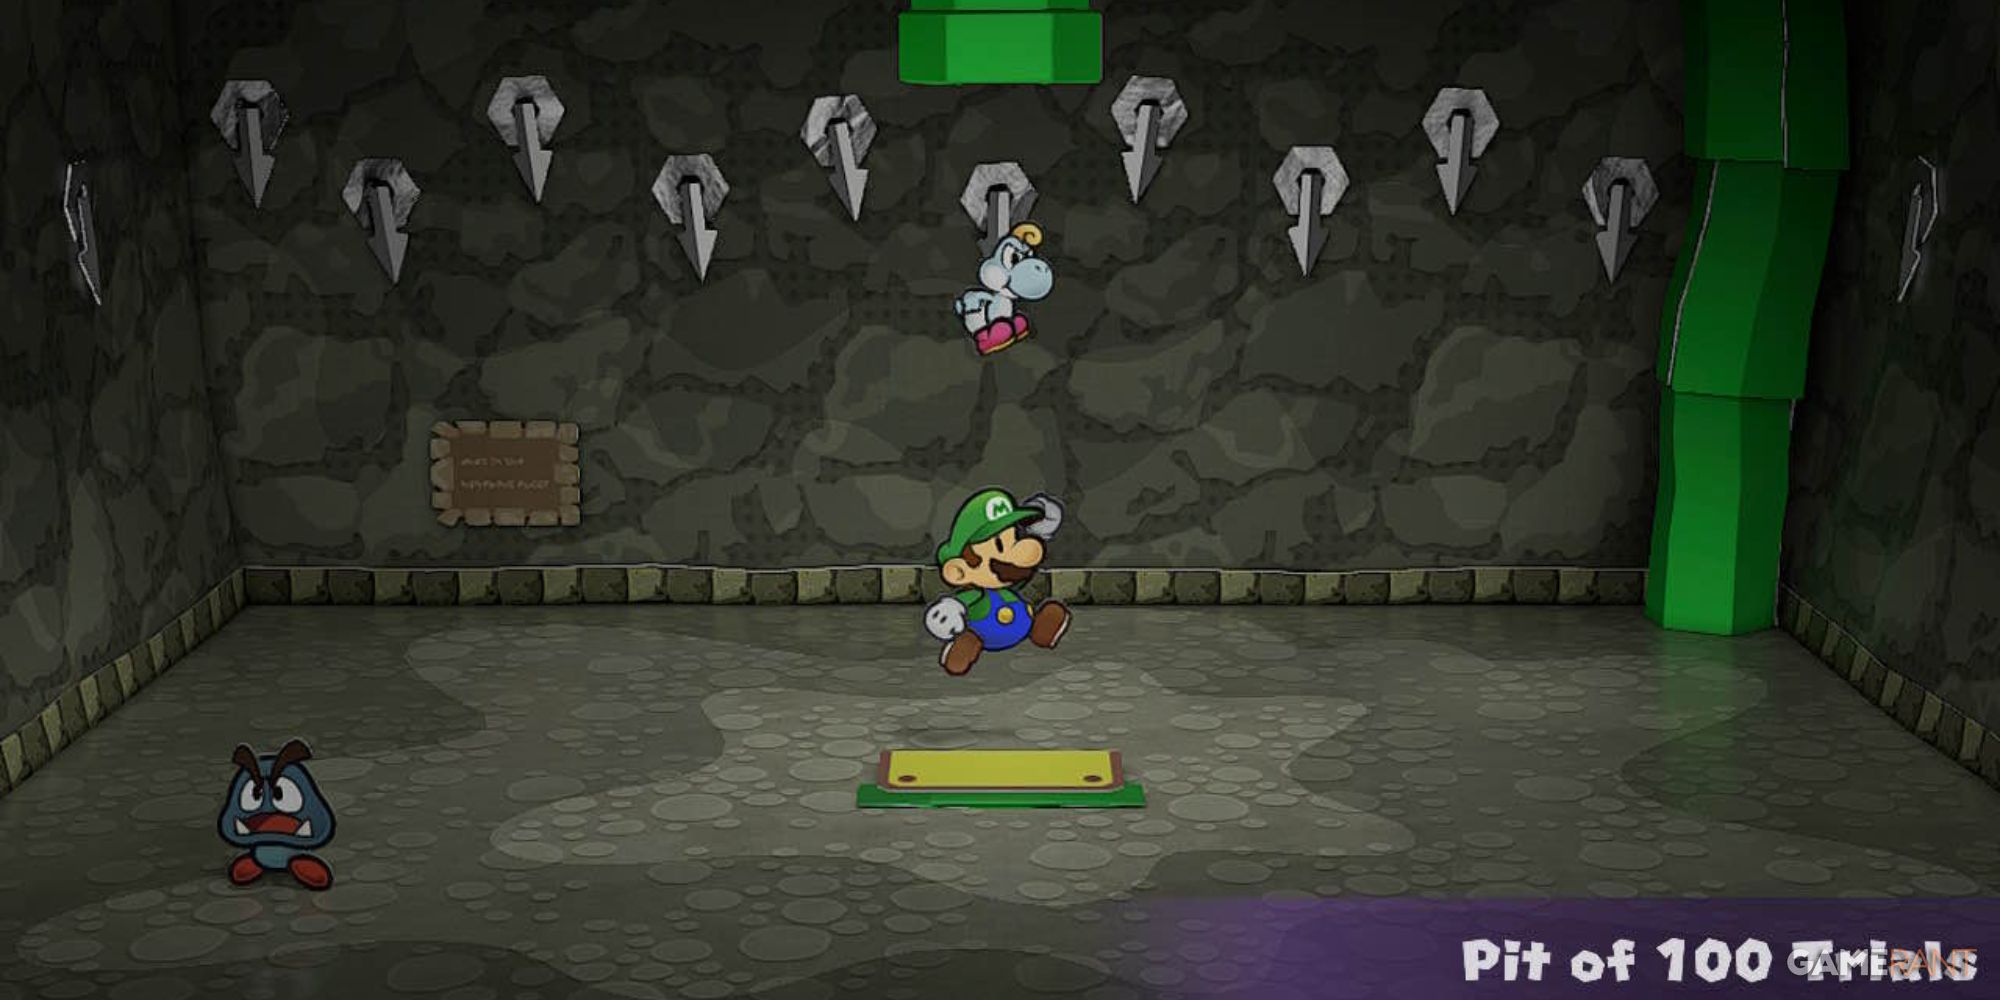 paper mario the thousand year door pit of 100 trials with white yoshi